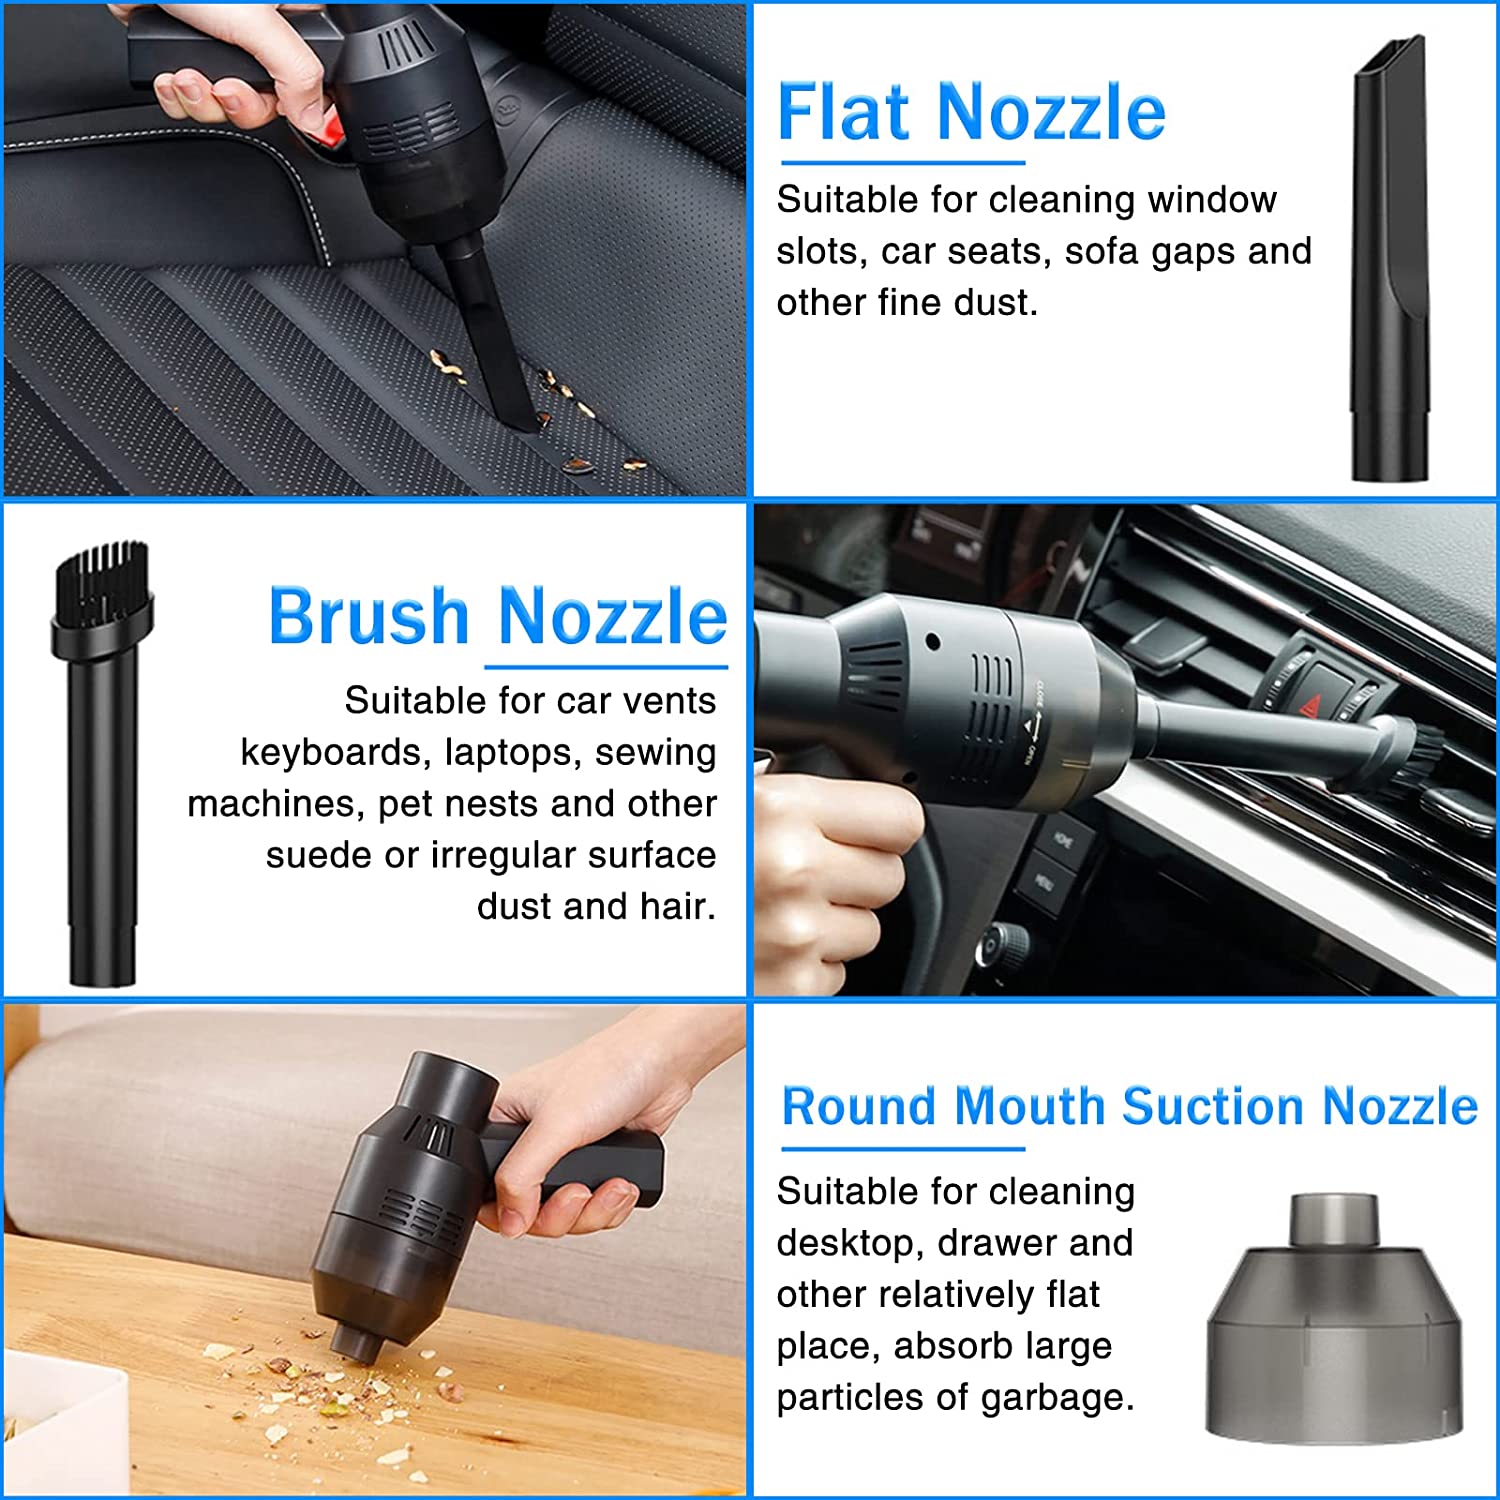 Keyboards-Keyboard-Cleaner-Powerful-Rechargeable-Mini-Vacuum-Cleaner-Cordless-Portable-Vacuum-Cleaner-Tool-for-Cleaning-Dust-Crumbs-Scraps-for-Laptop-Computer-32